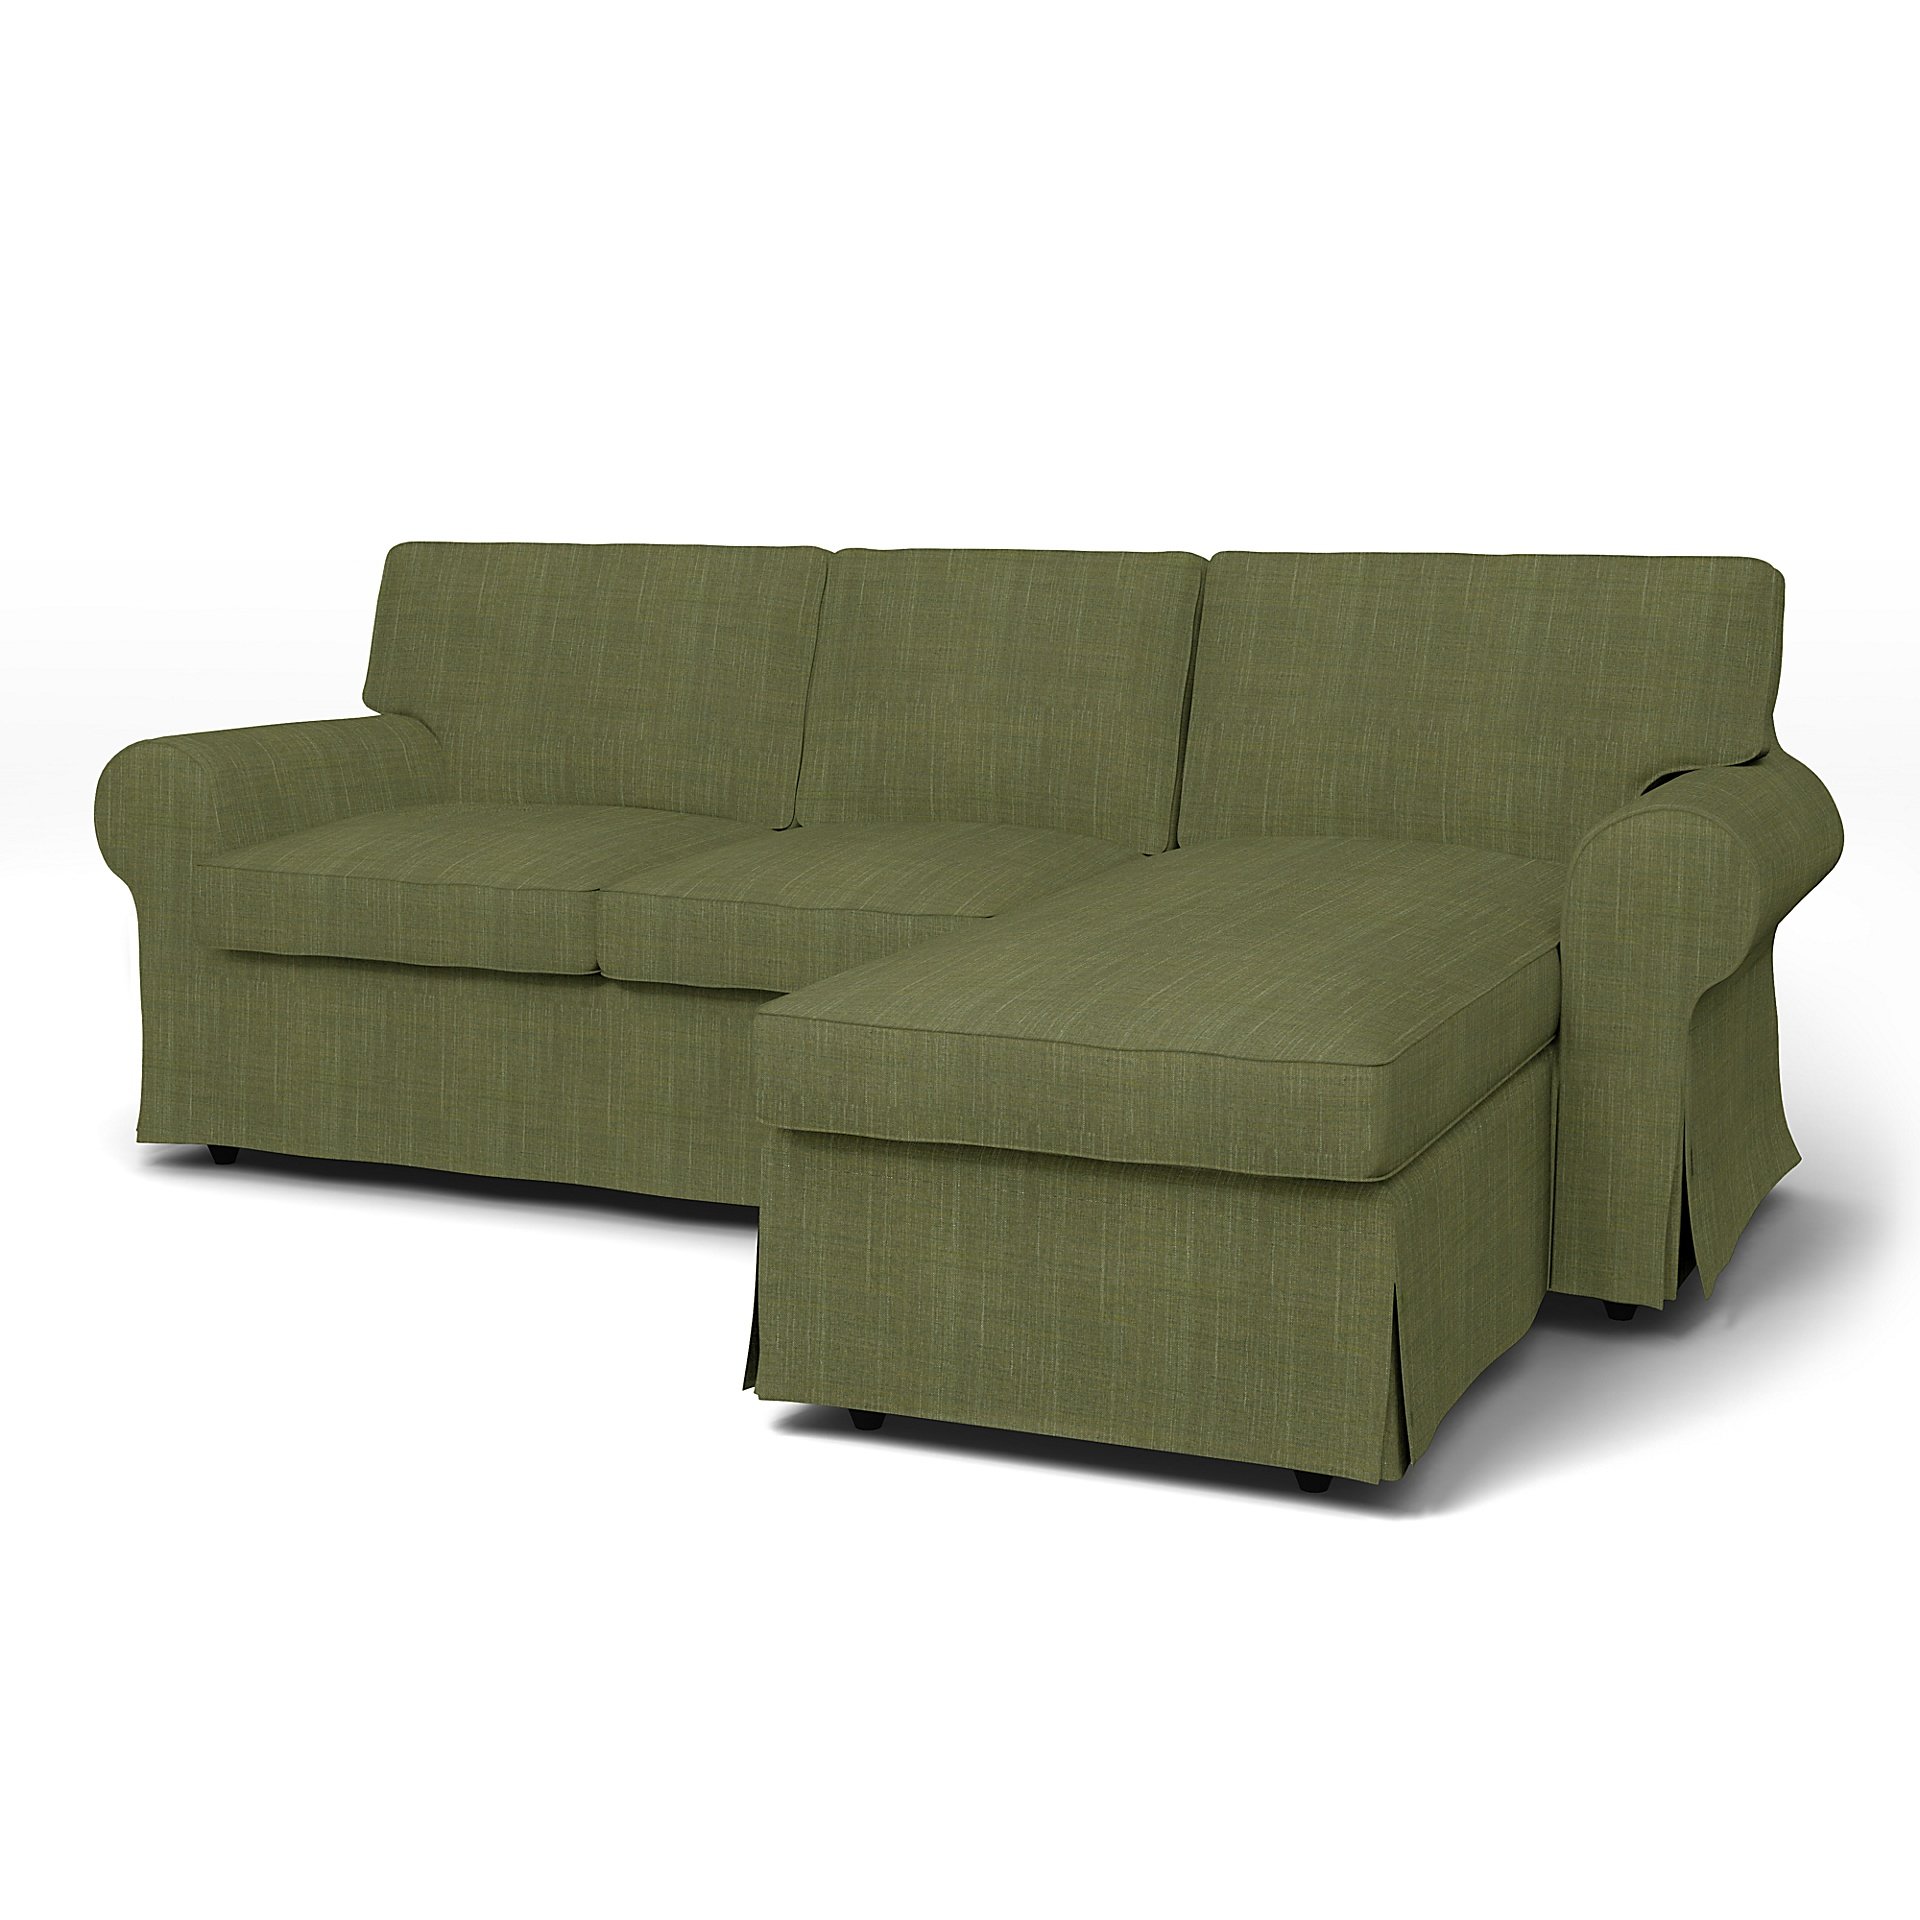 IKEA - Ektorp 3 Seater Sofa with Chaise Cover, Moss Green, Boucle & Texture - Bemz